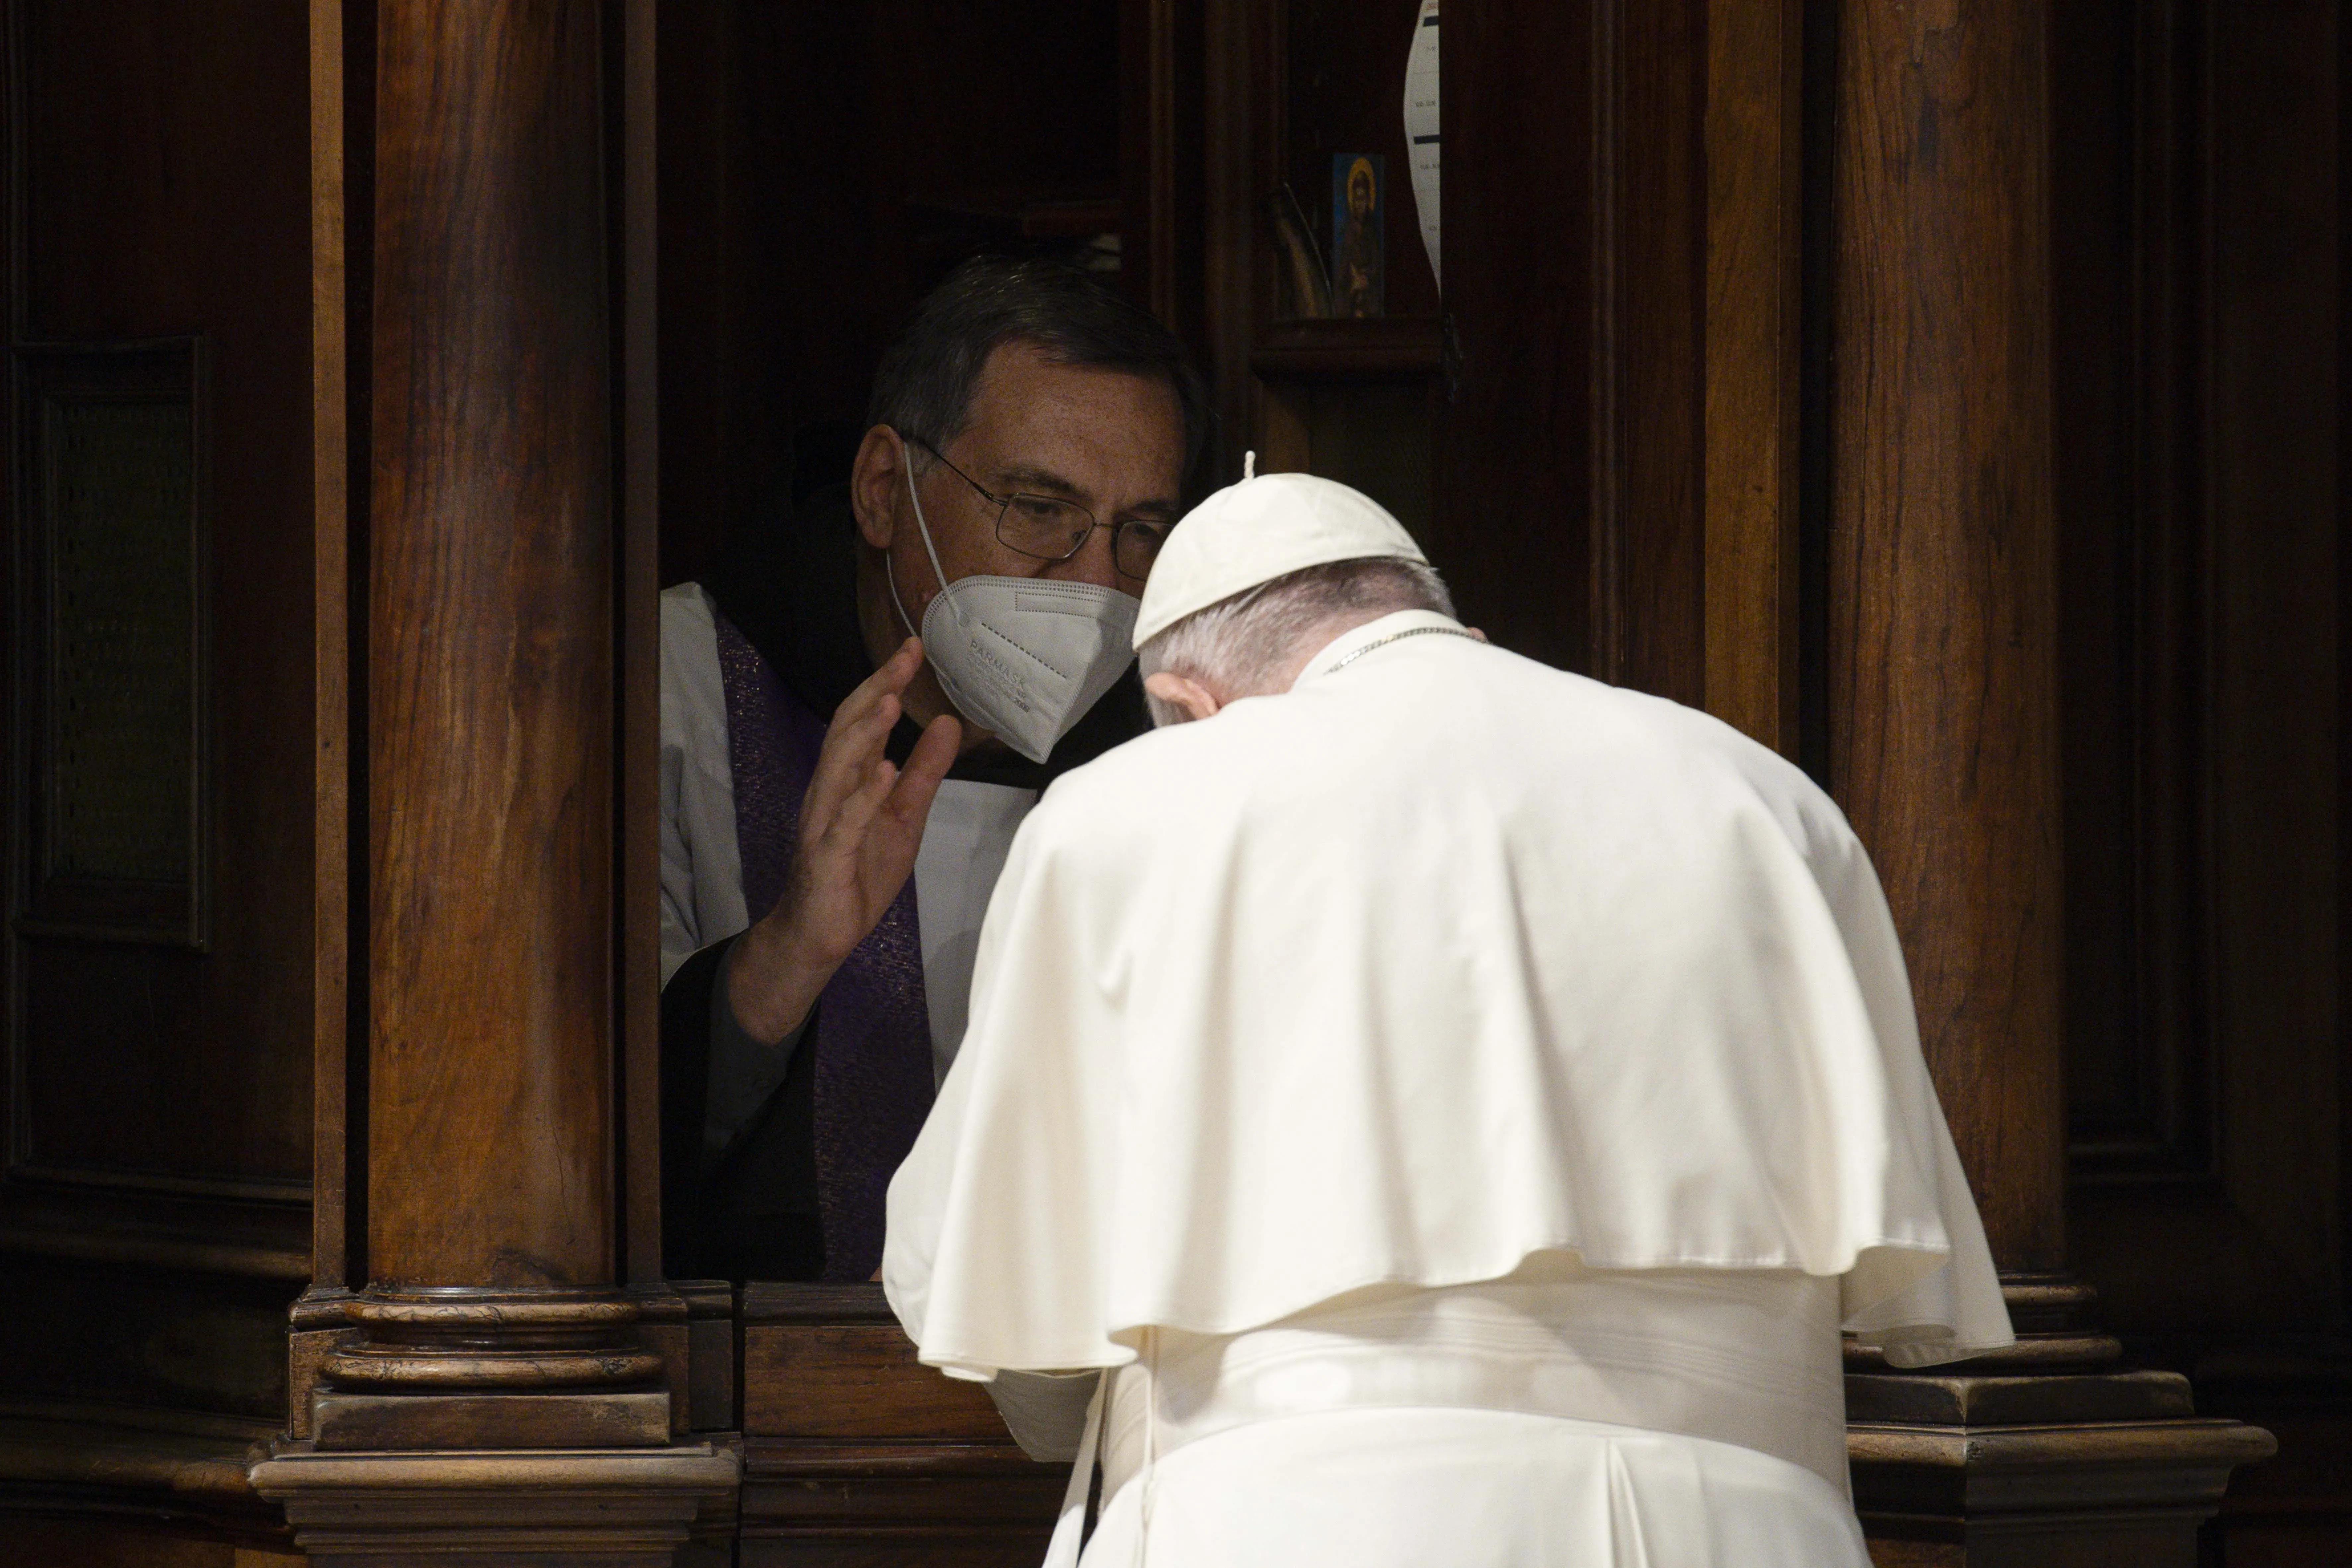 Pope Francis goes to confession during a penance service in St. Peter's Basilica on March 25, 2022. Vatican Media.